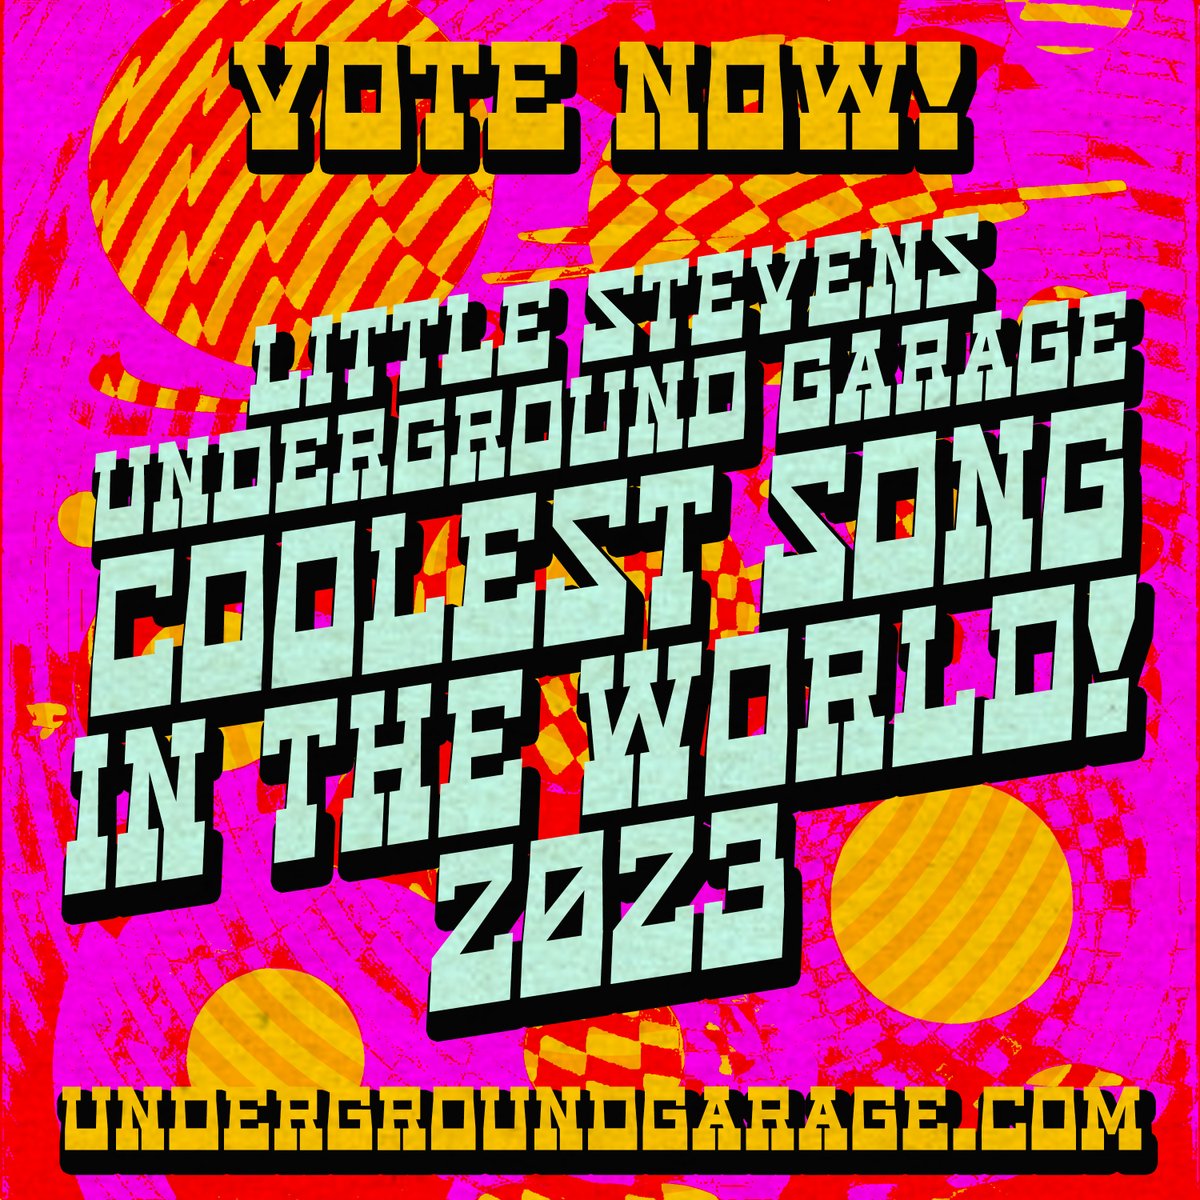 VOTE FOR THE COOLEST SONG IN THE WORLD IN LITTLE STEVEN’S UNDERGROUND GARAGE! 2023 undergroundgarage.com/coolestsong2023